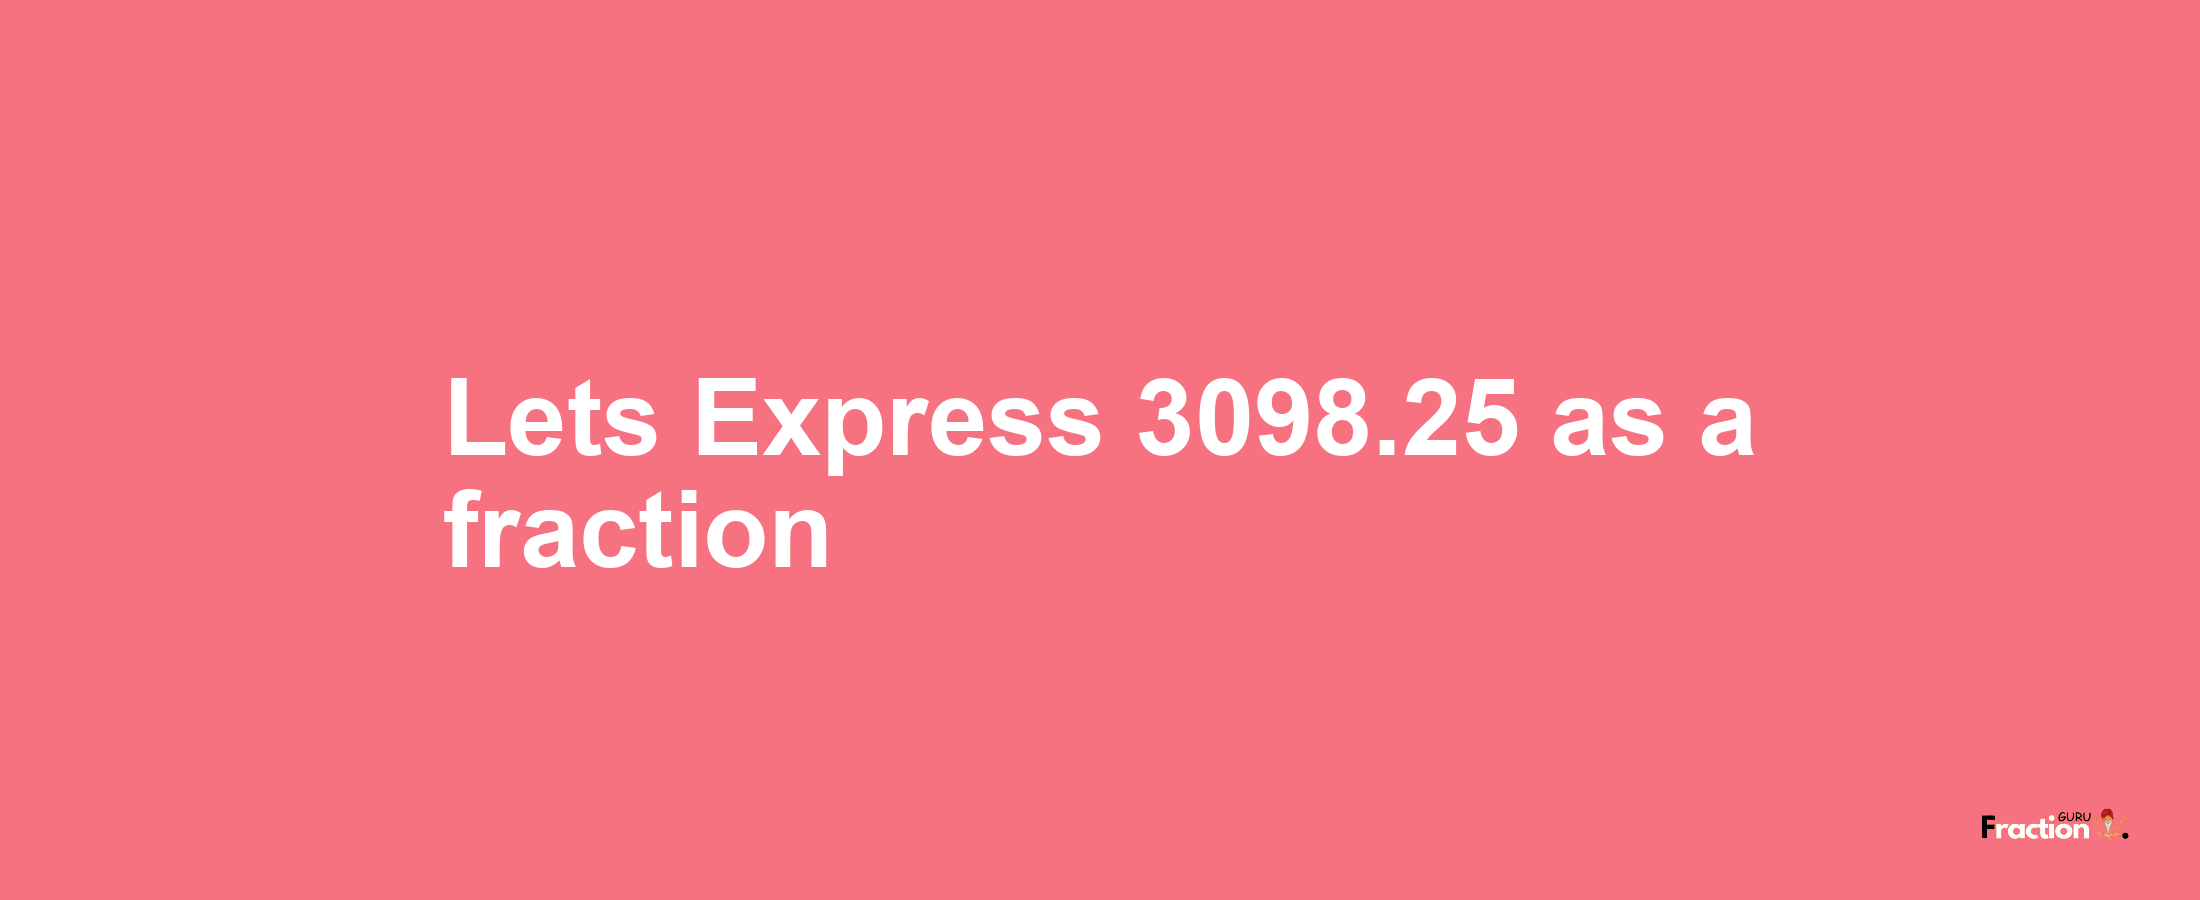 Lets Express 3098.25 as afraction